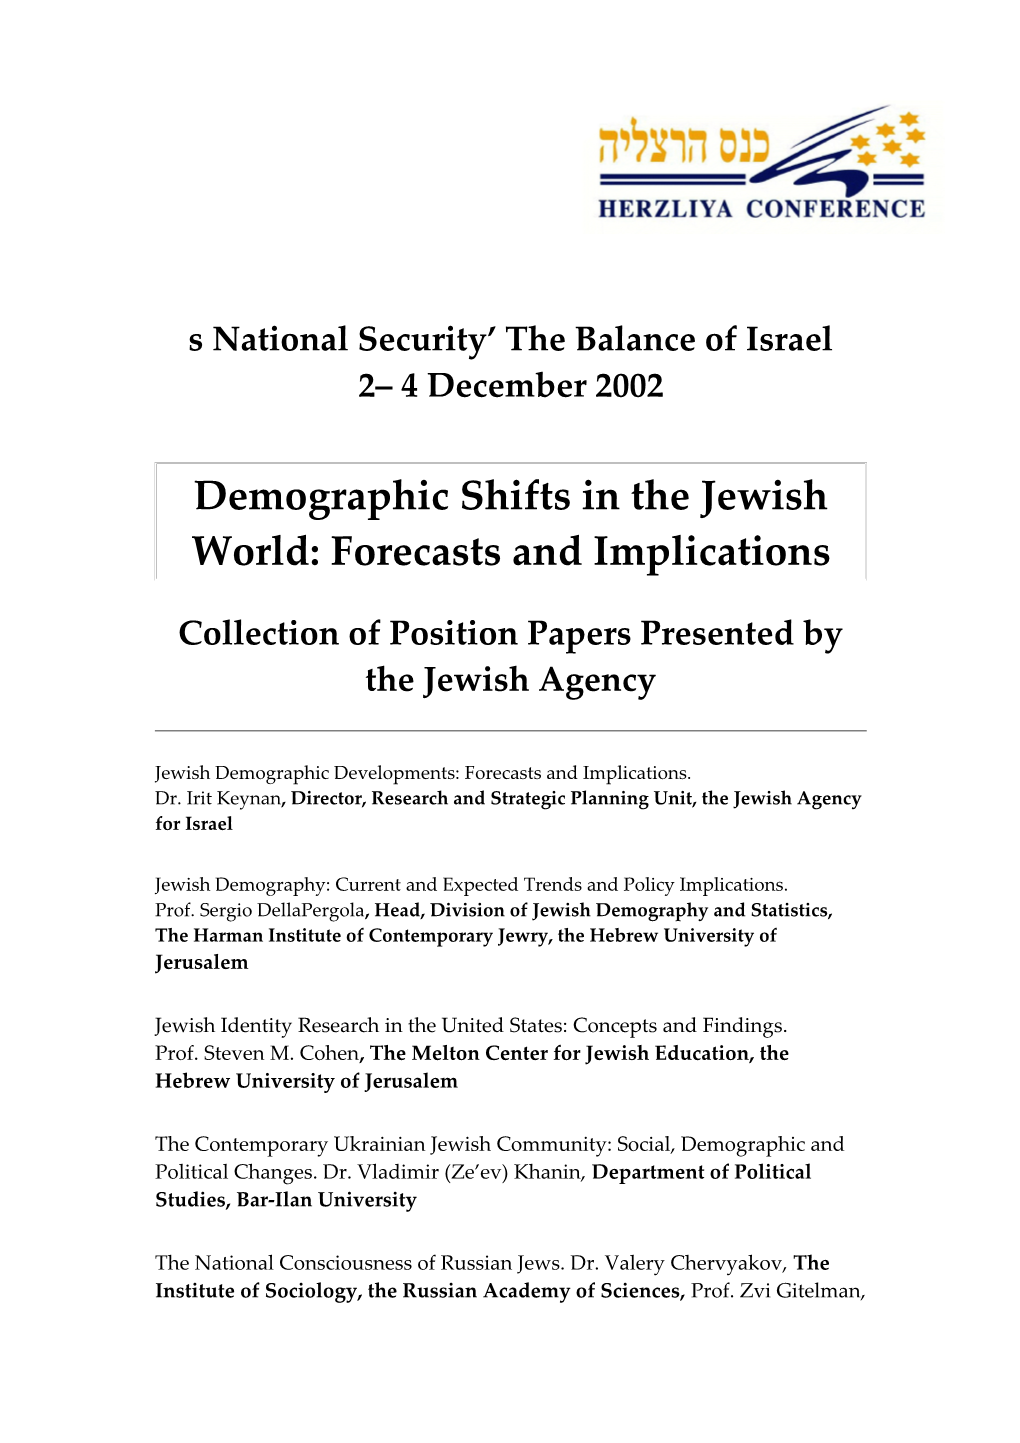 S National Security the Balance of Israel